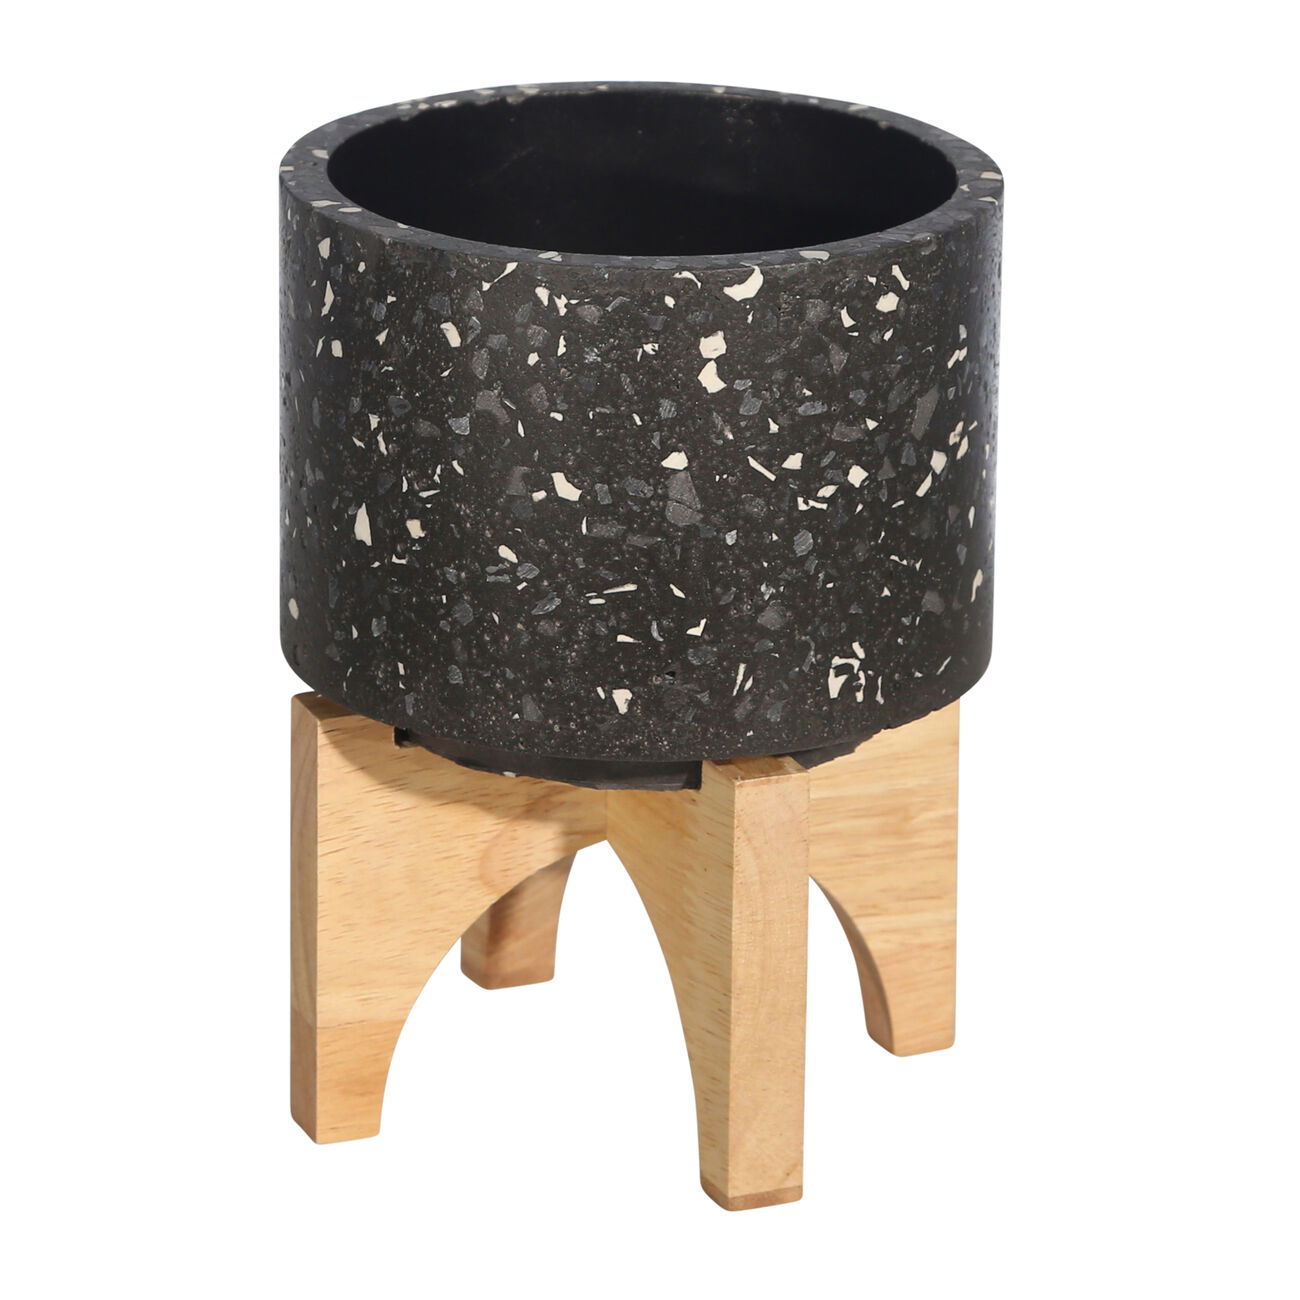 Mosaic Round Cement Planter on Wooden Stand, Small, Black and Brown